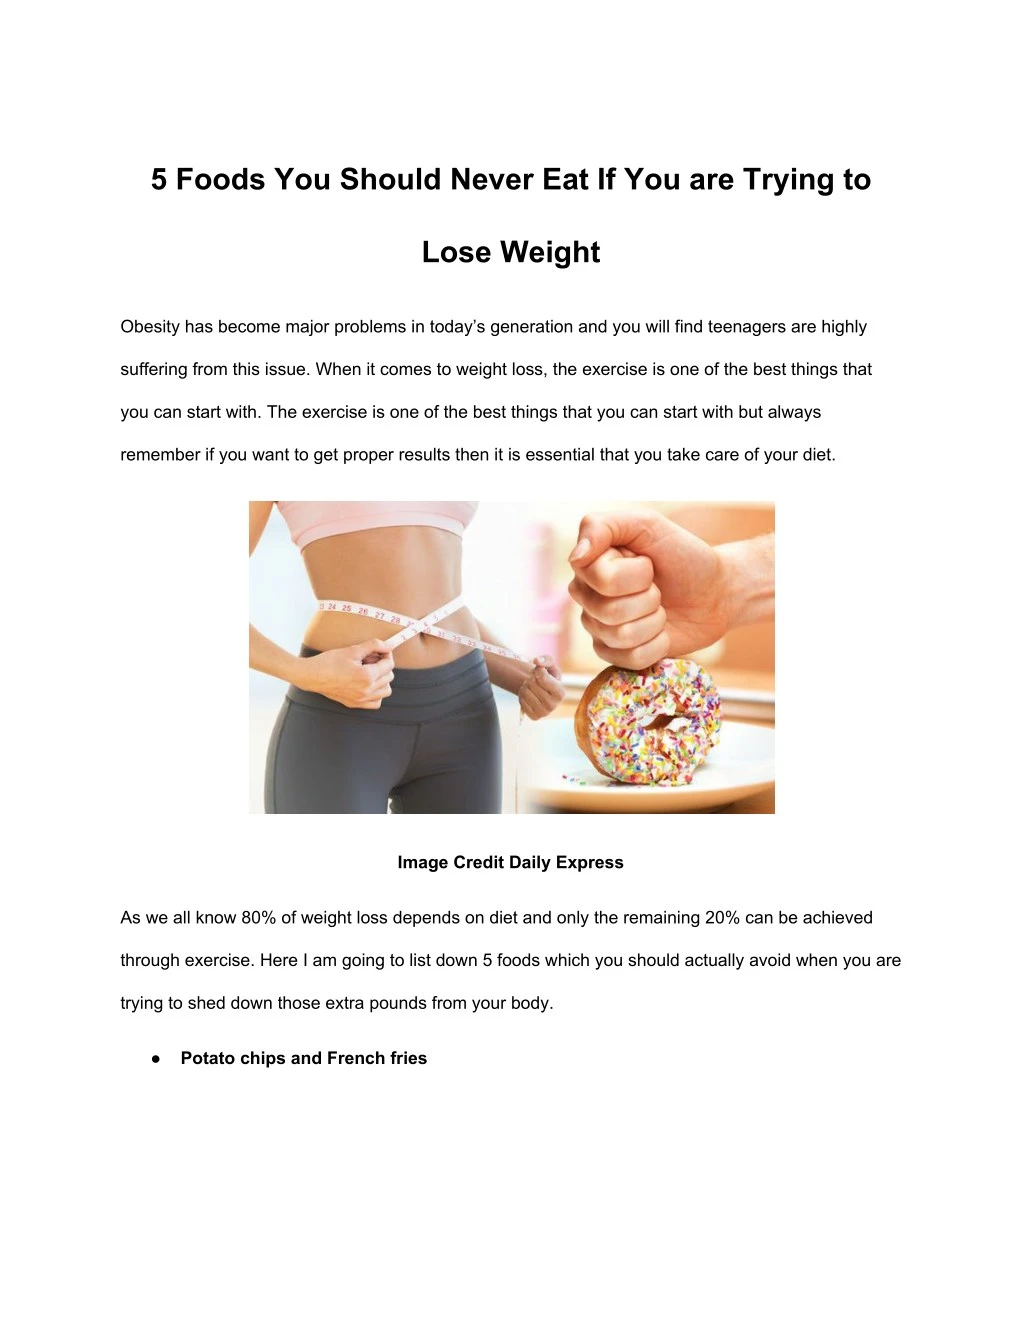 5 foods you should never eat if you are trying to